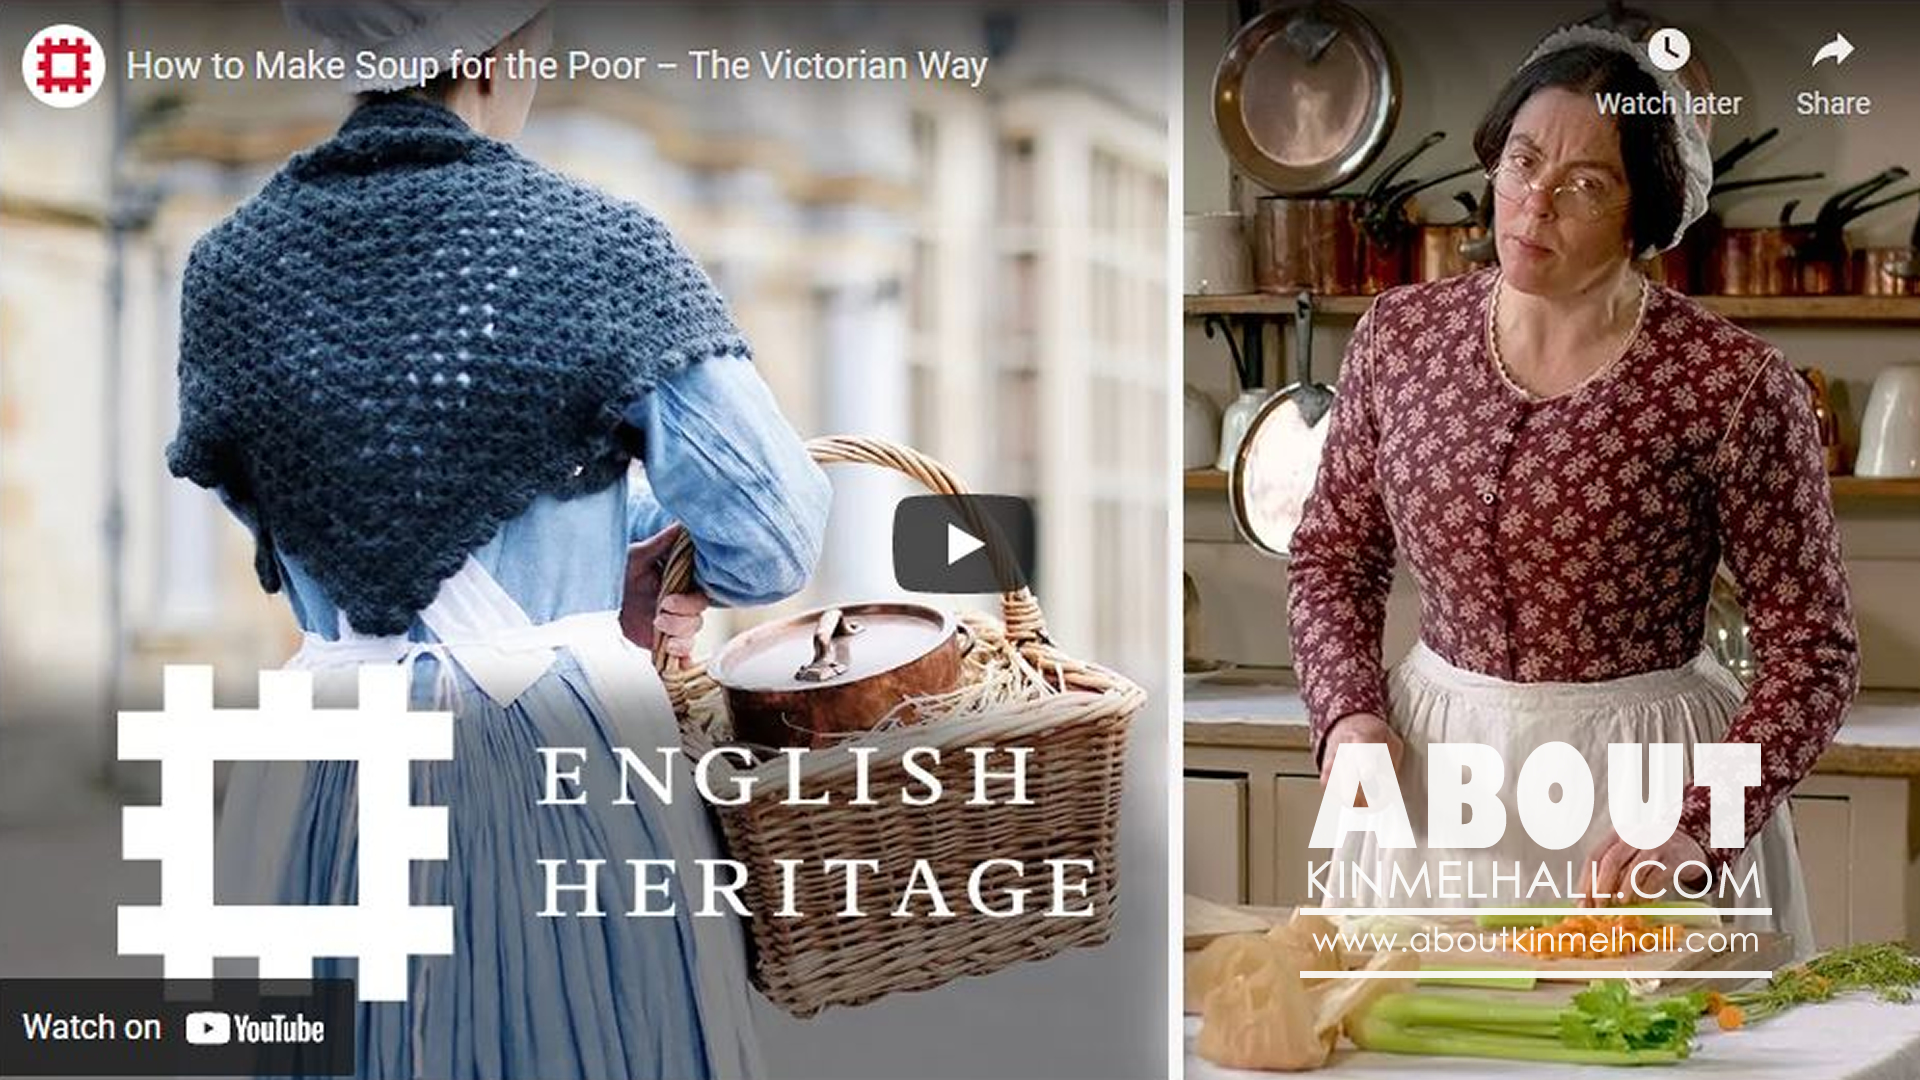 Education Resources - Victorian Cookery Session 5 by English Heritage